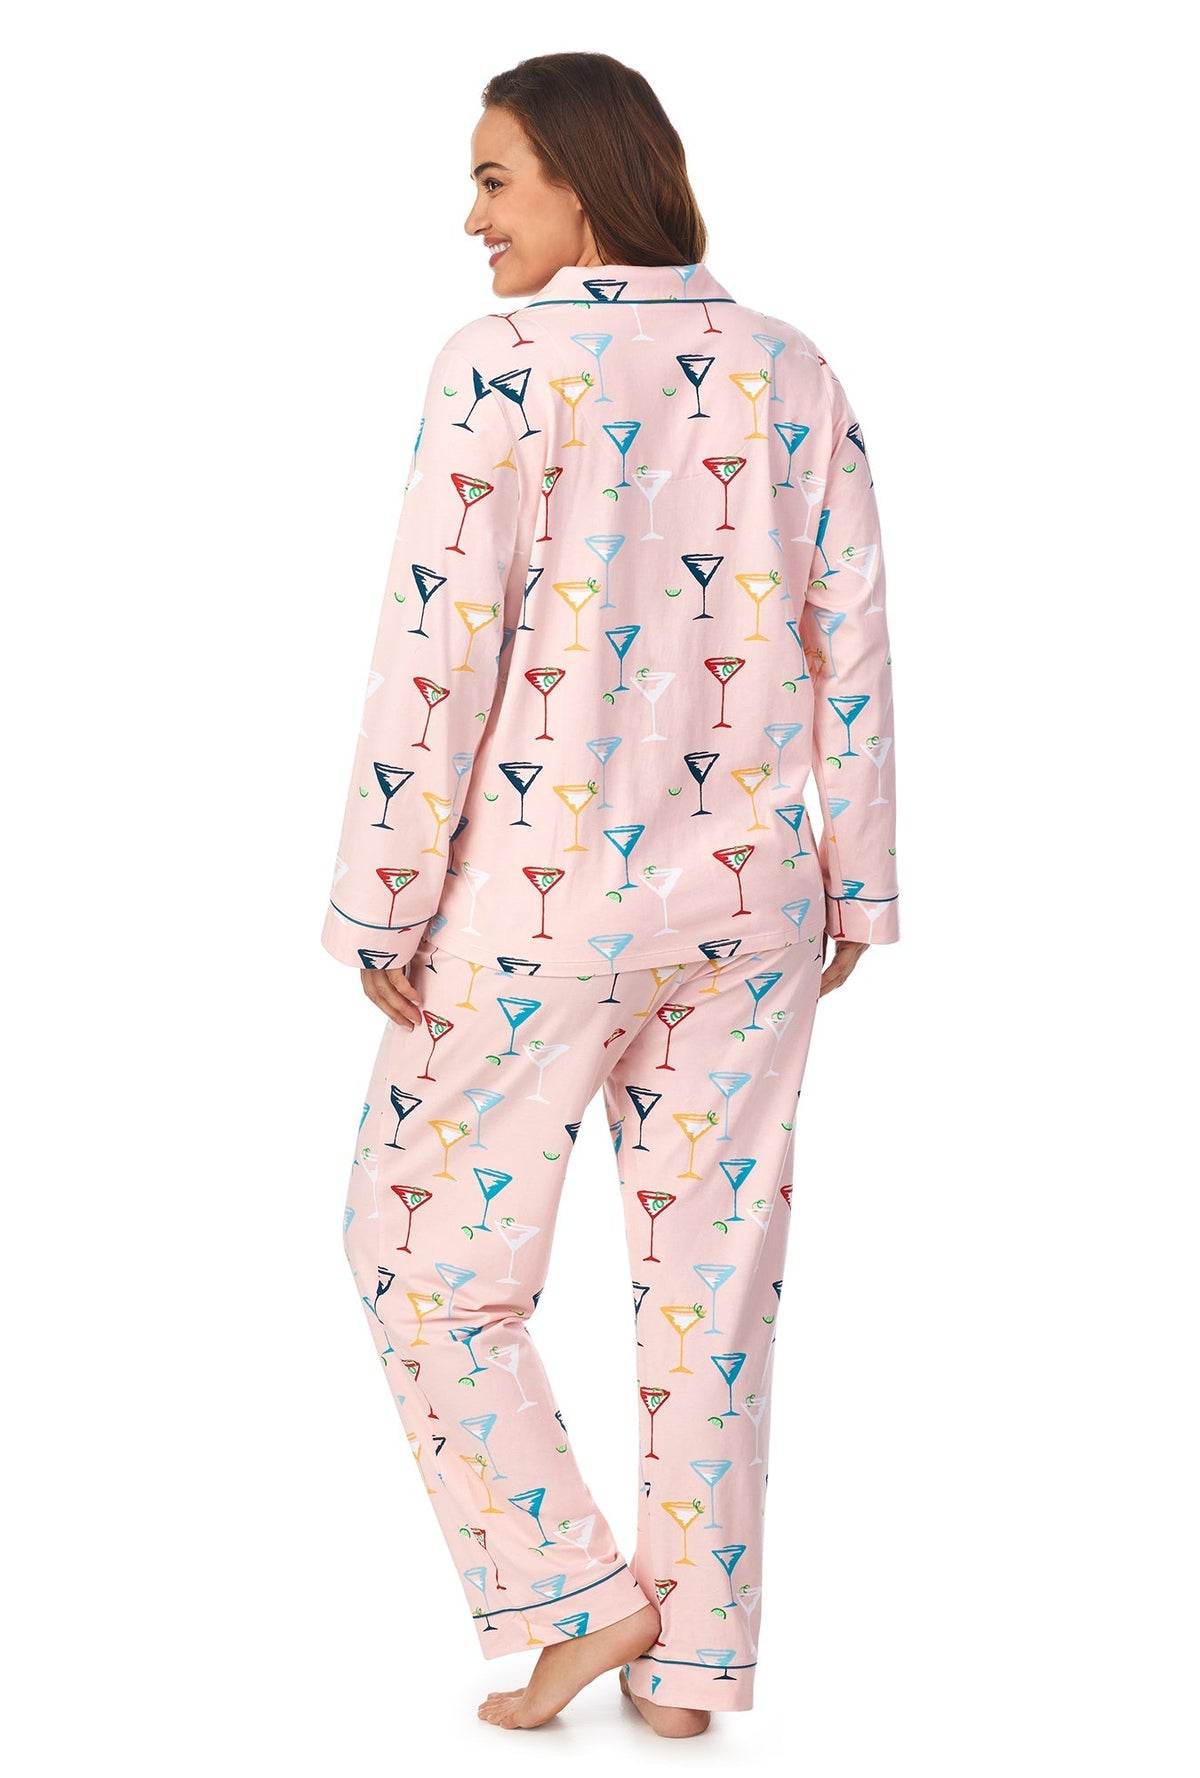 A lady wearing a pink long sleeve plus size pj set with glass pattern.